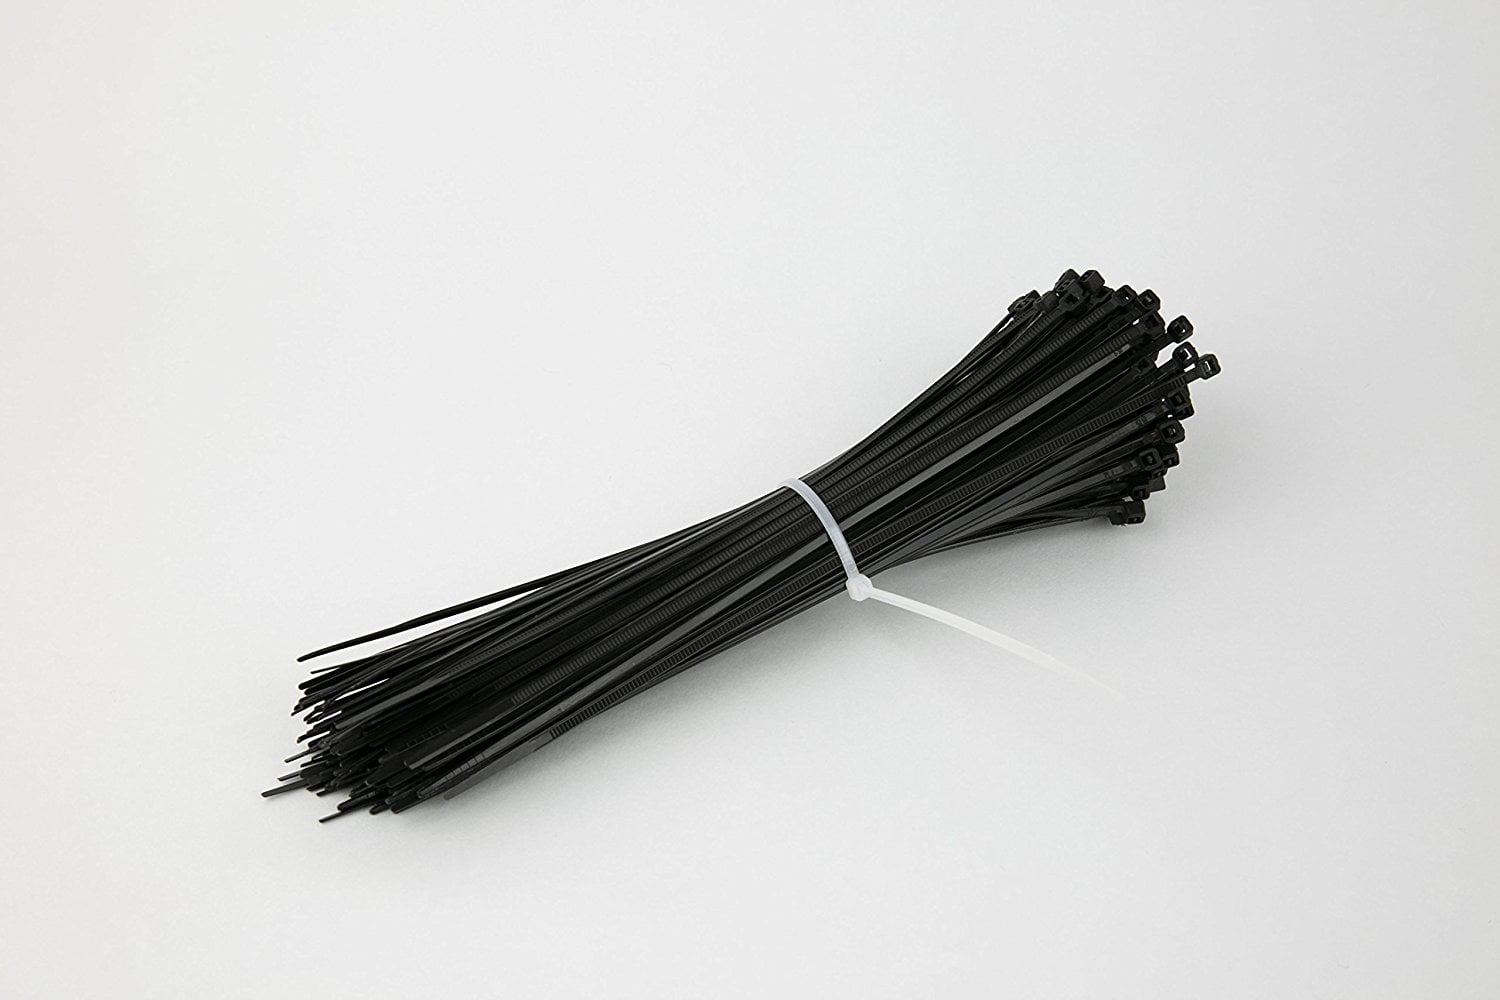 Details about   12 inch 100PCS Nylon Wire Zip Ties Cable Ties UV Black 75lbs Self-locking Wraps 